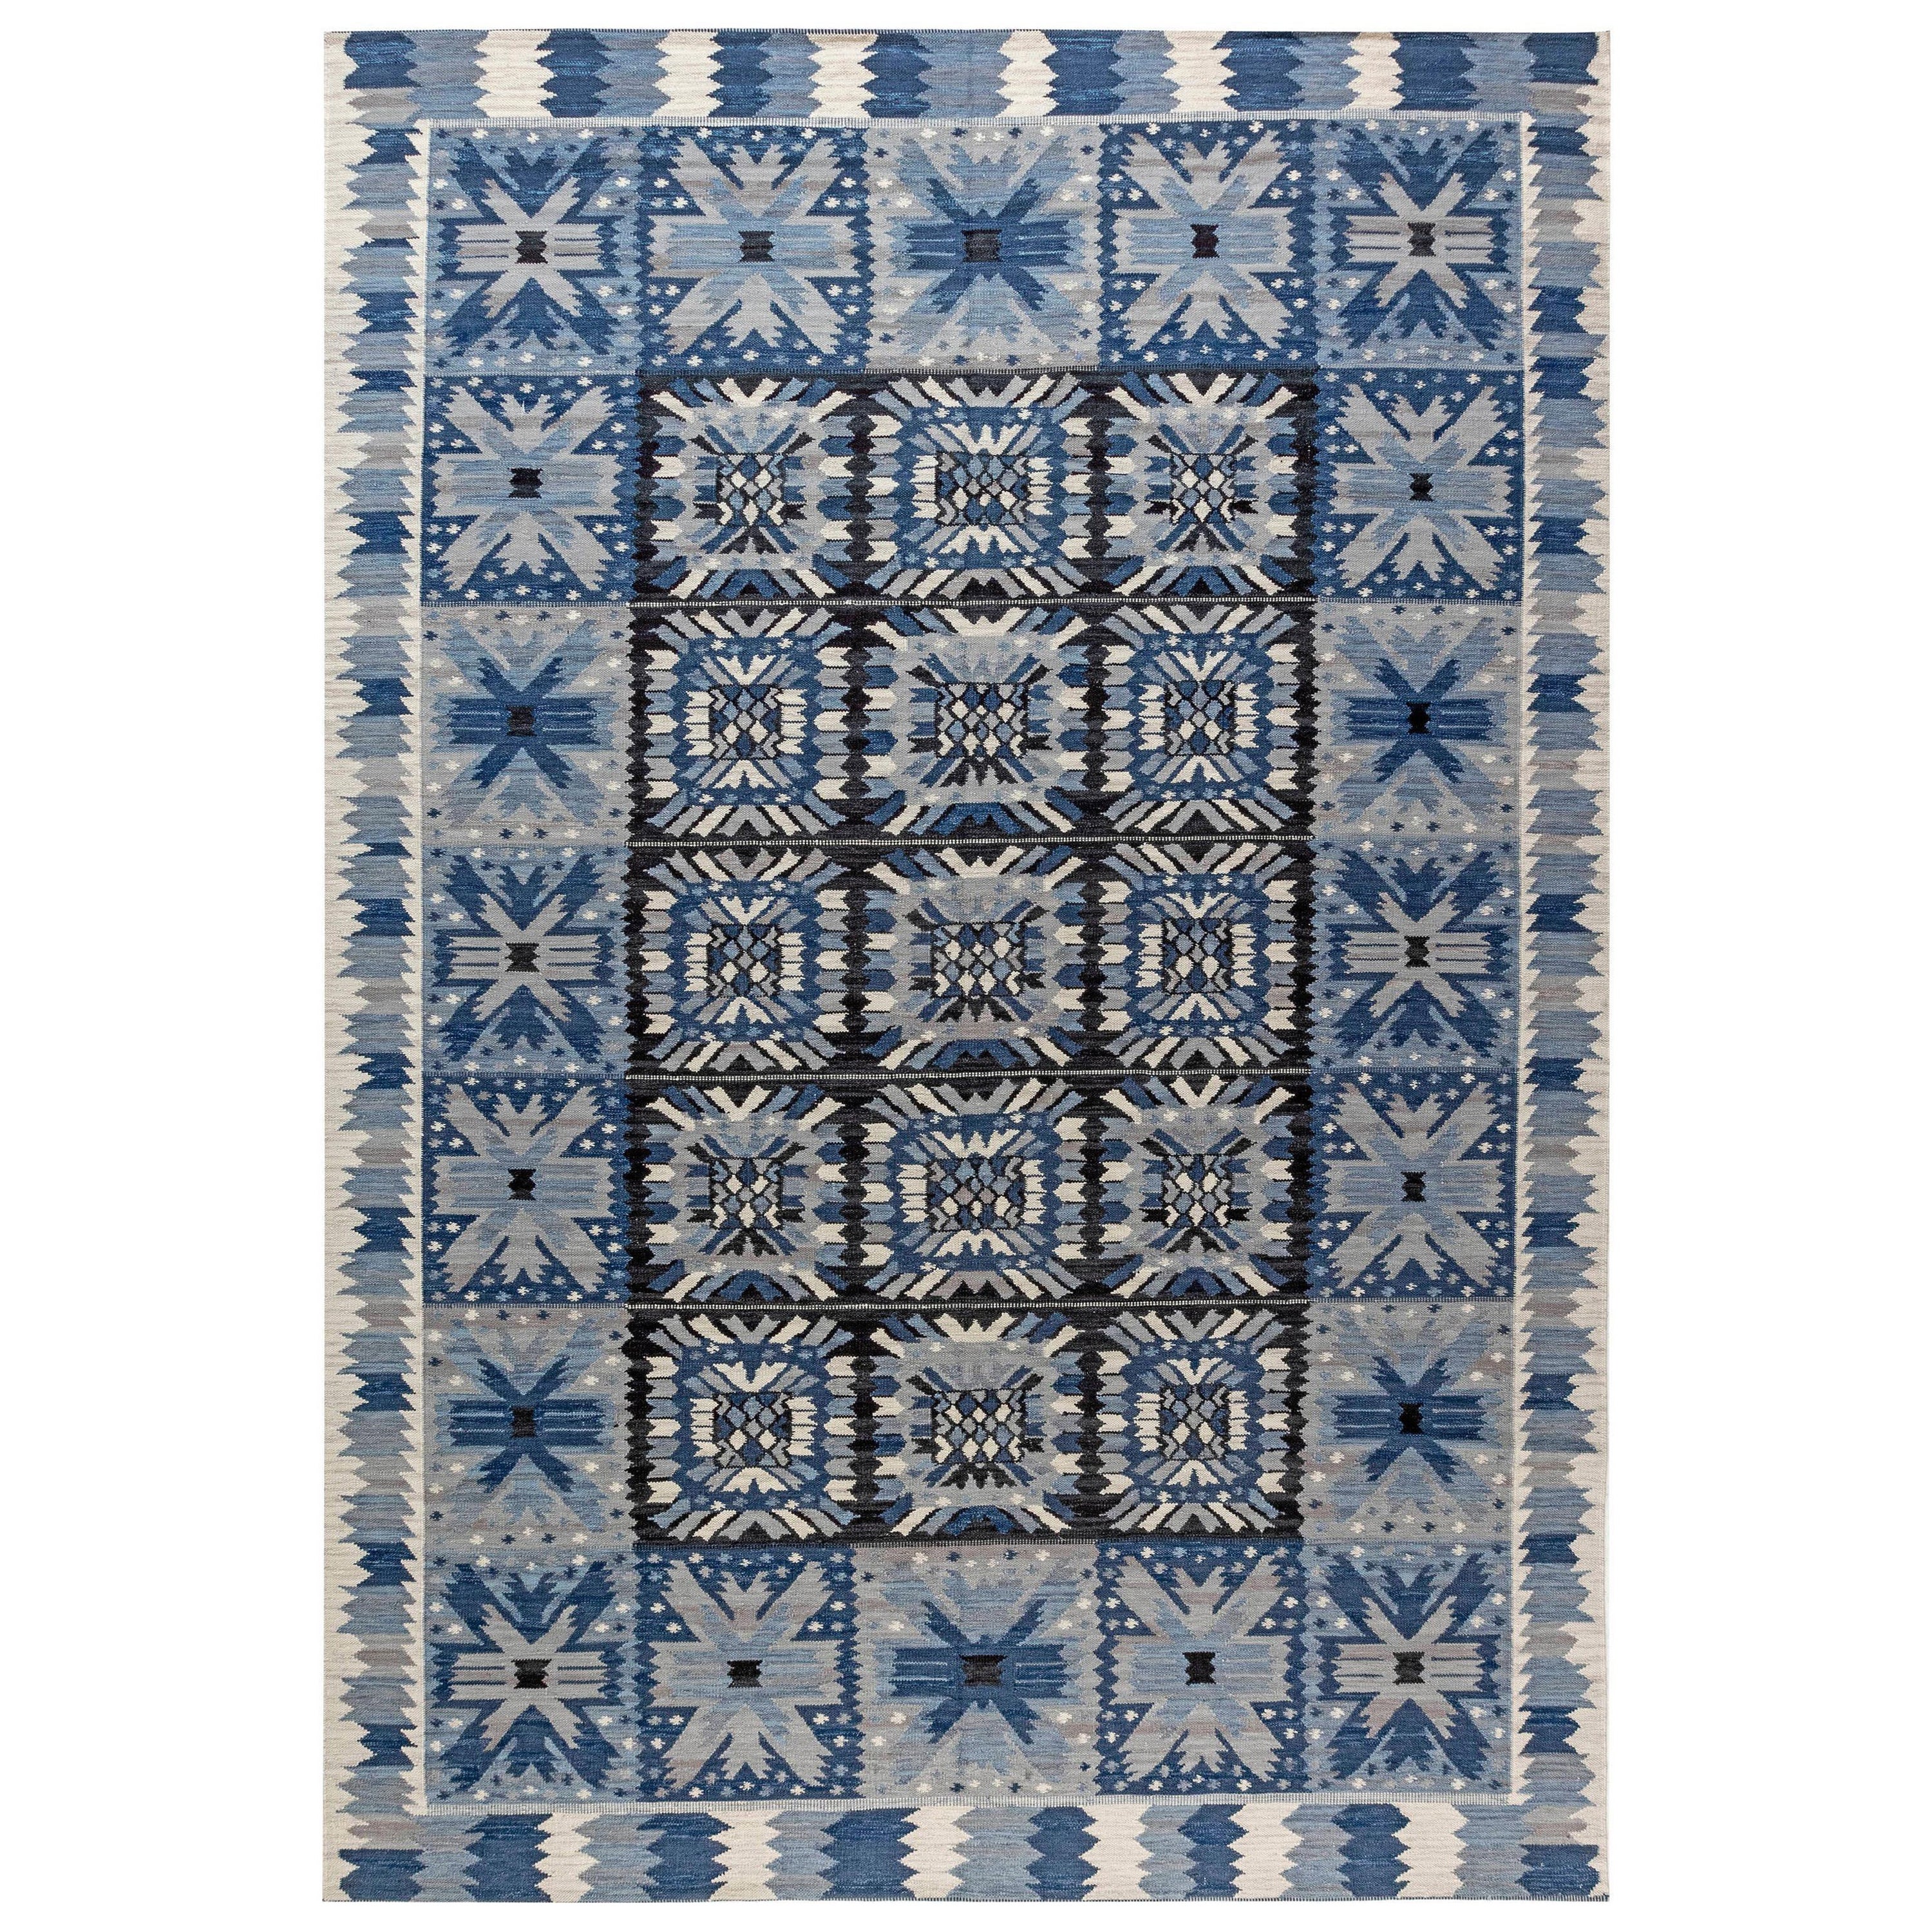 Contemporary Swedish Inspired Flat-Weave Rug by Doris Leslie Blau For Sale